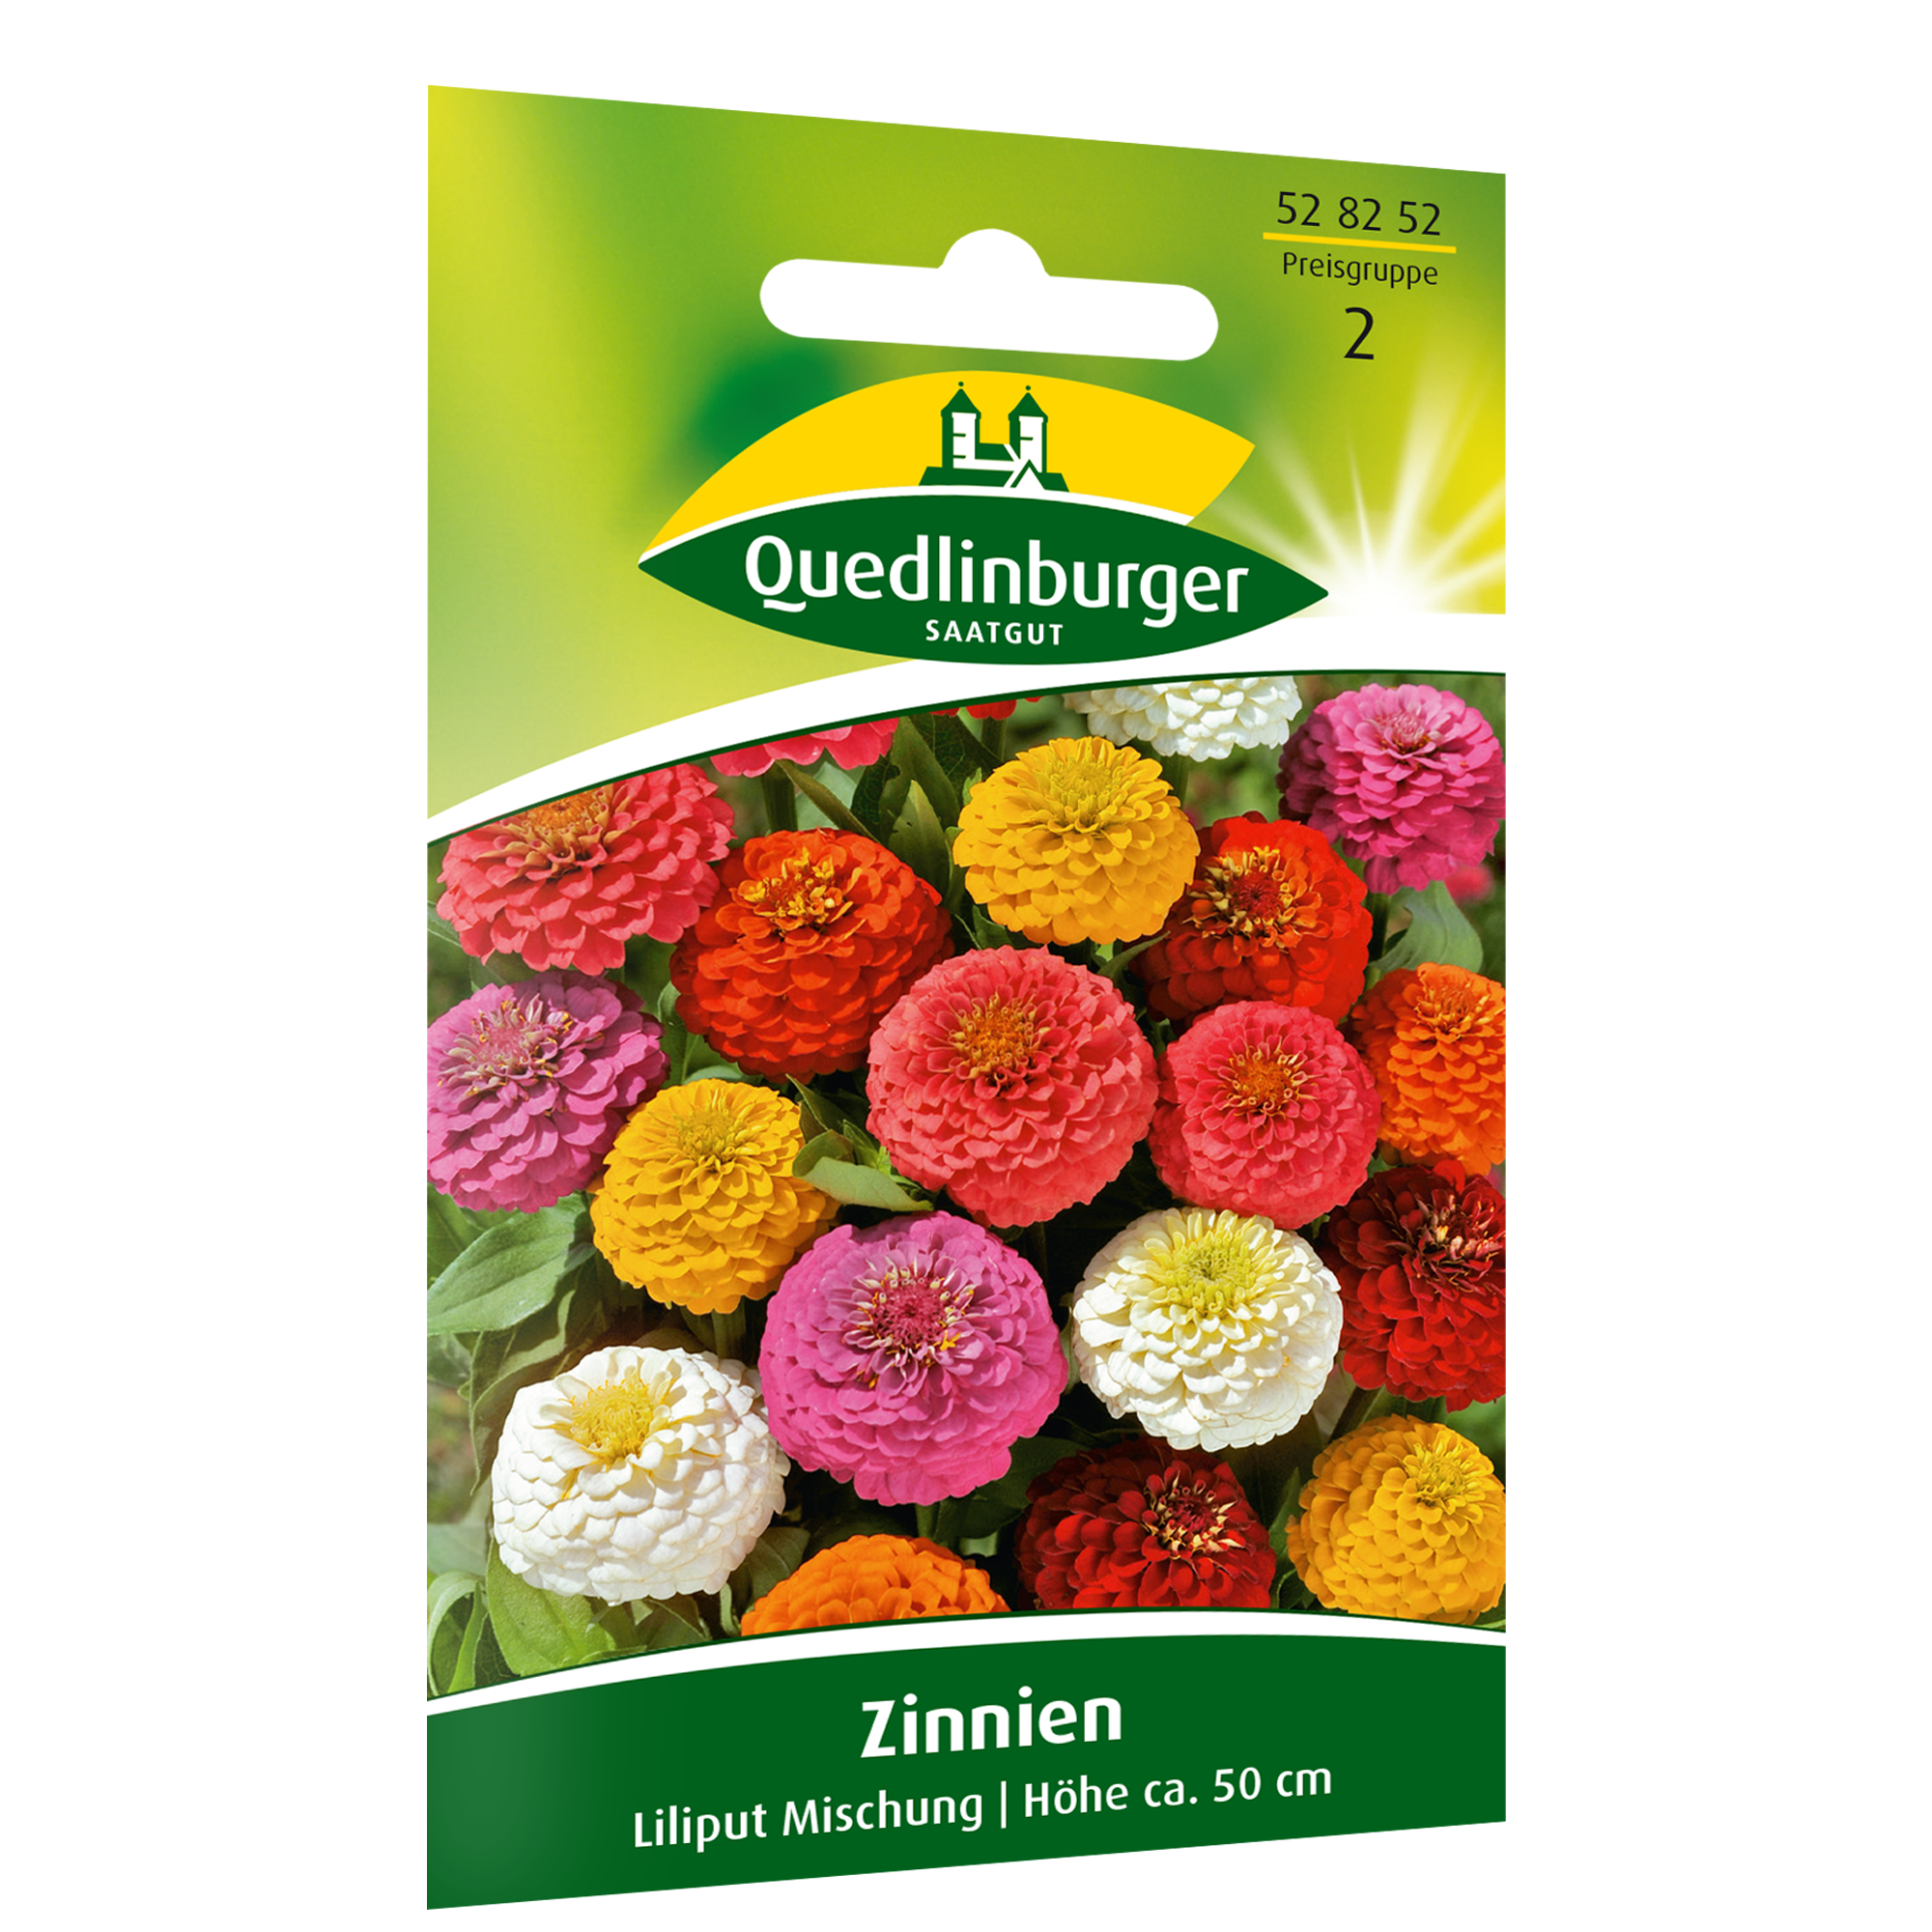 Zinnien 'Lilliput' Mischung + product picture